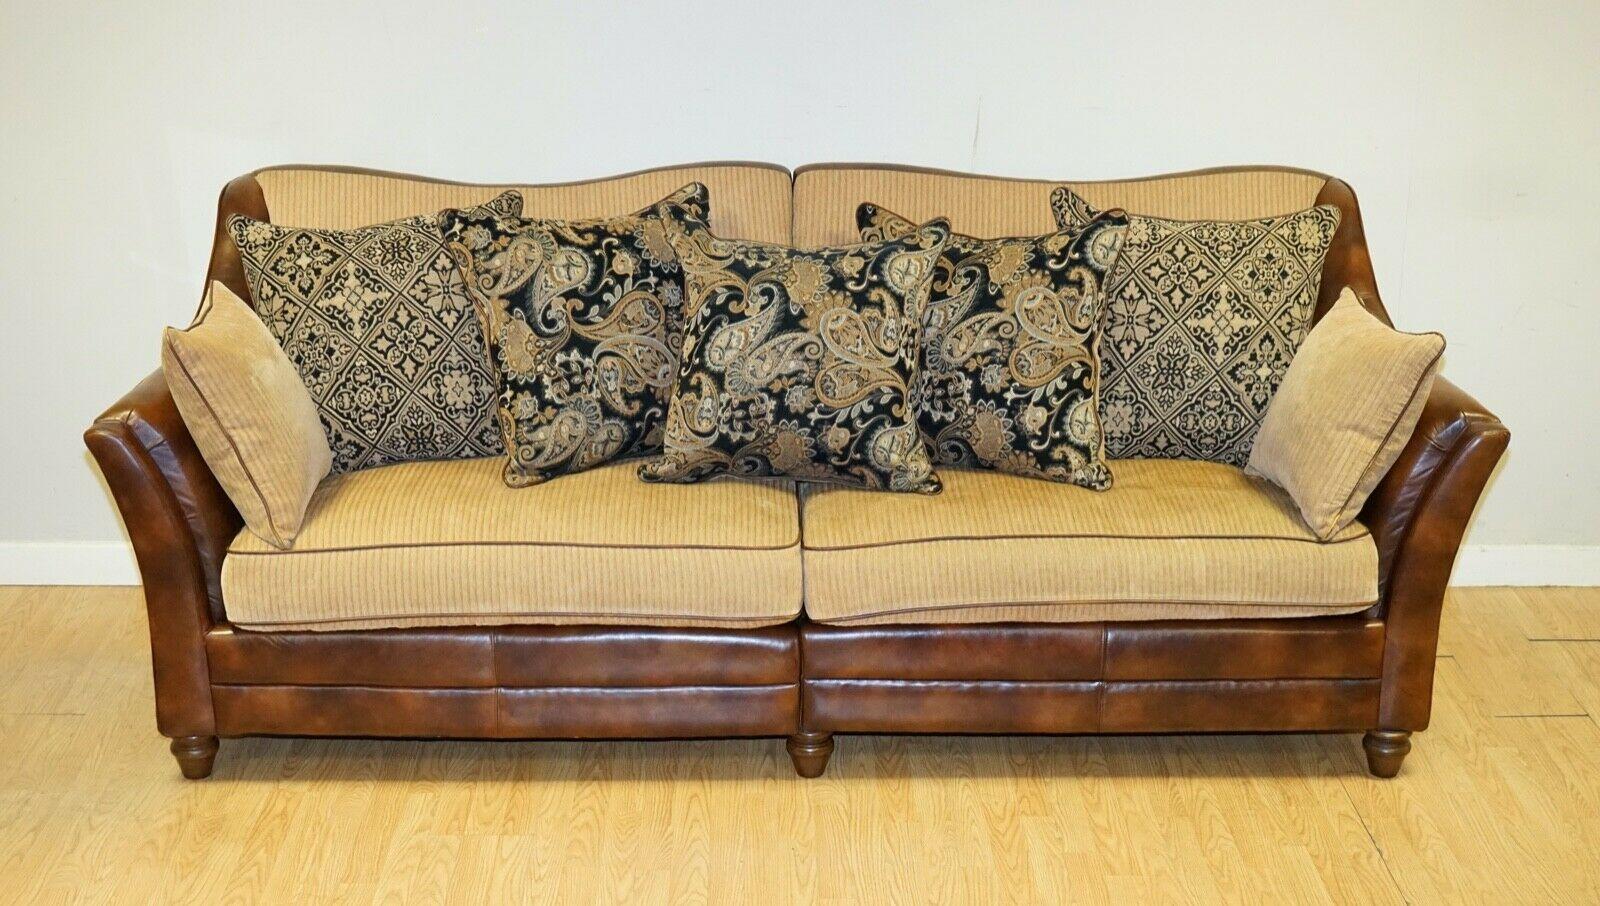 We are delighted to sell this very comfortable Tetrad style leather & fabric sofa.
The scatter pillows have all been replaced with new ones bought from John Lewis.
The best thing about this sofa is that it gives you great comfort and also saves